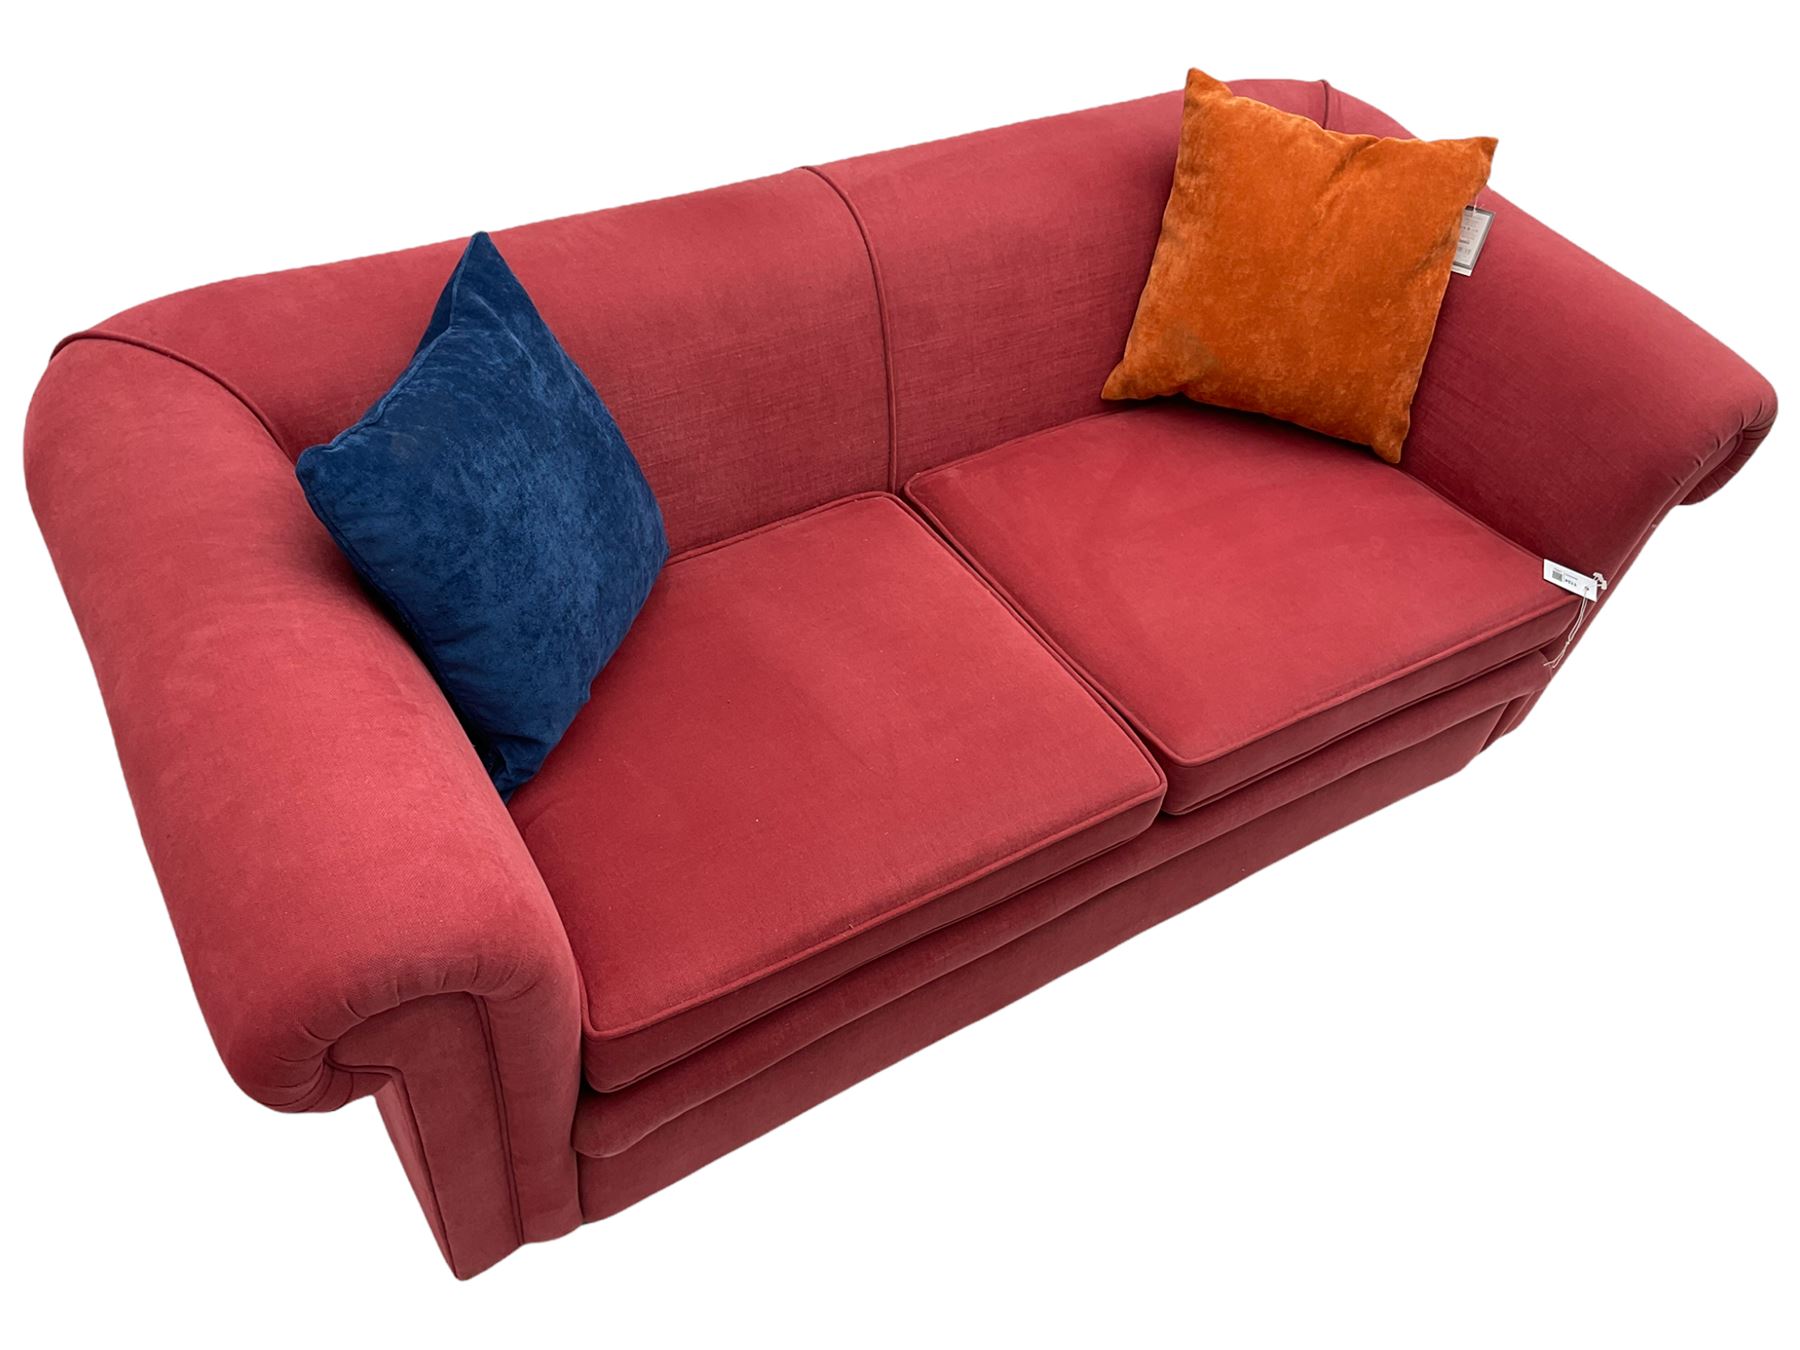 Two seat Chesterfield sofa - Image 5 of 6